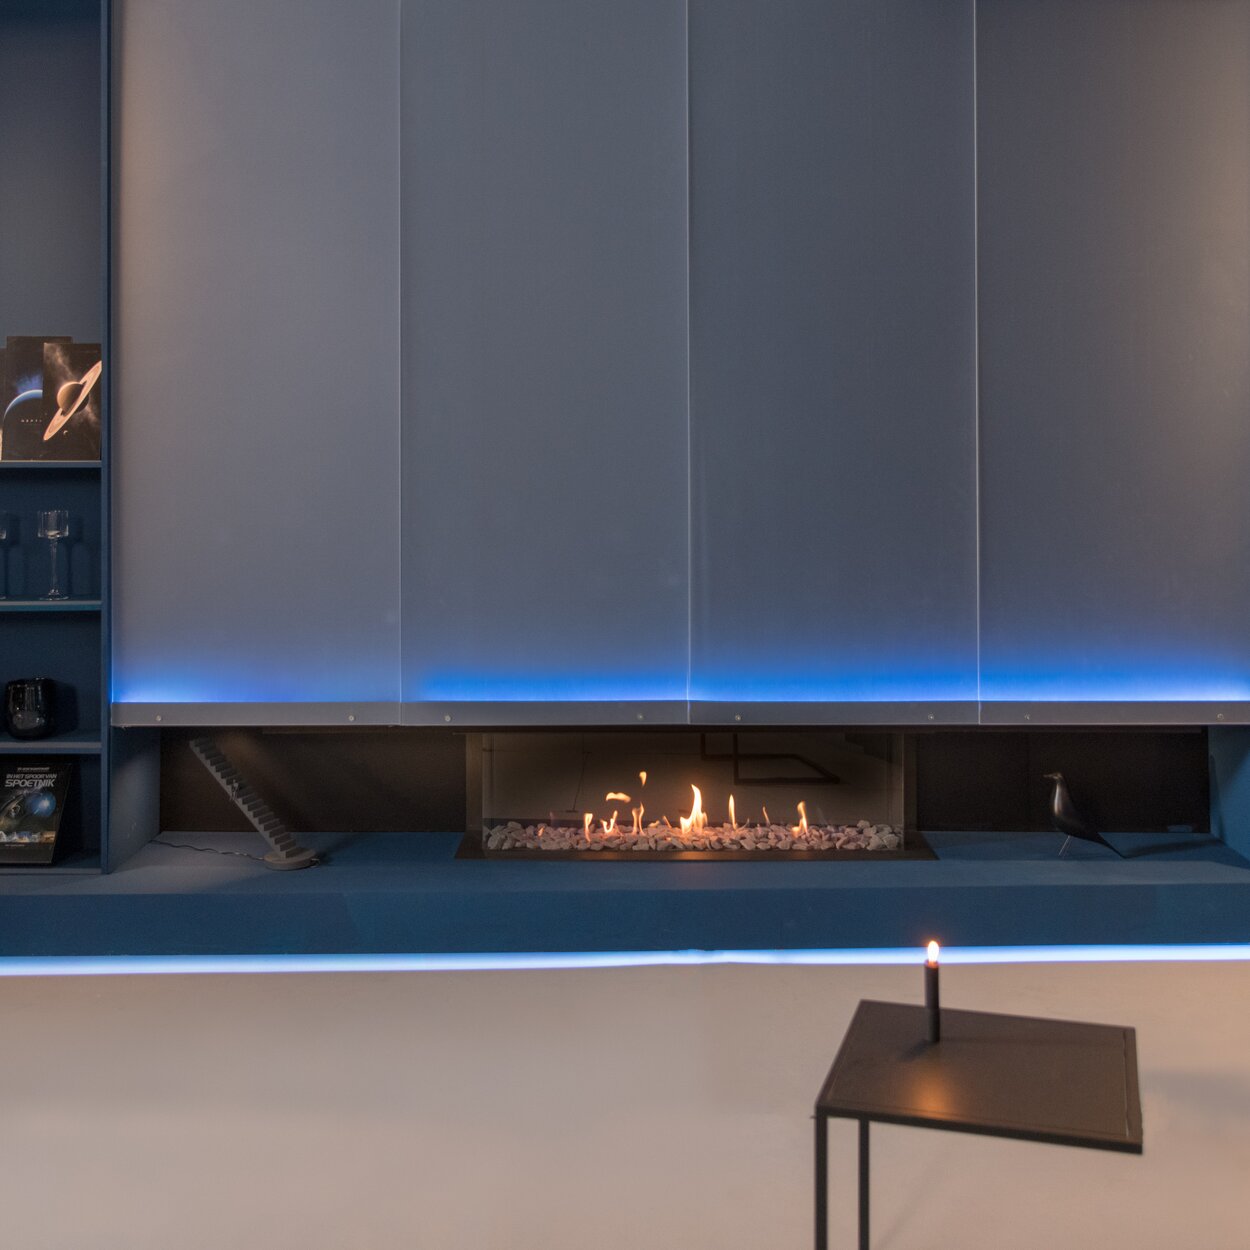 3-sided gas fireplace MatriX Linear 1300/400 from Faber in the living room with blue lighting